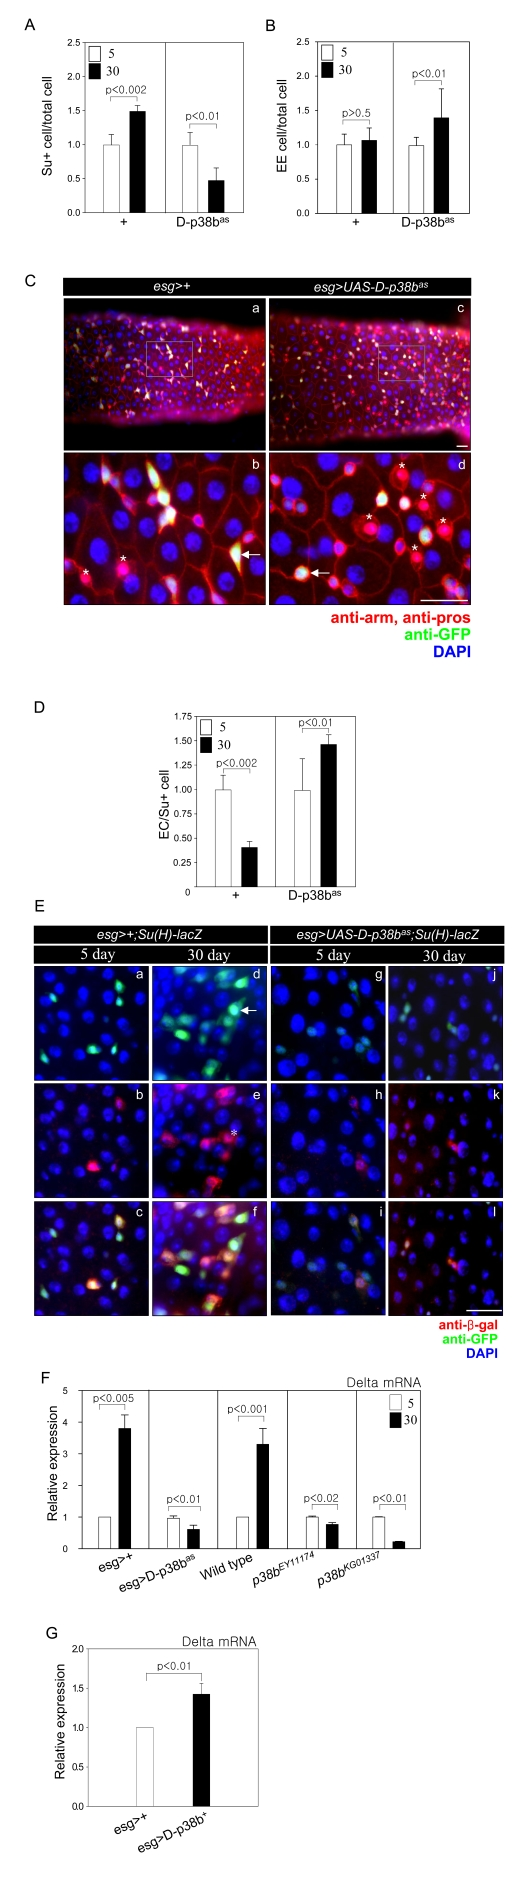 D-p38b MAPK plays a role in age-related defects in the differentiation of ISCs and progenitor cells